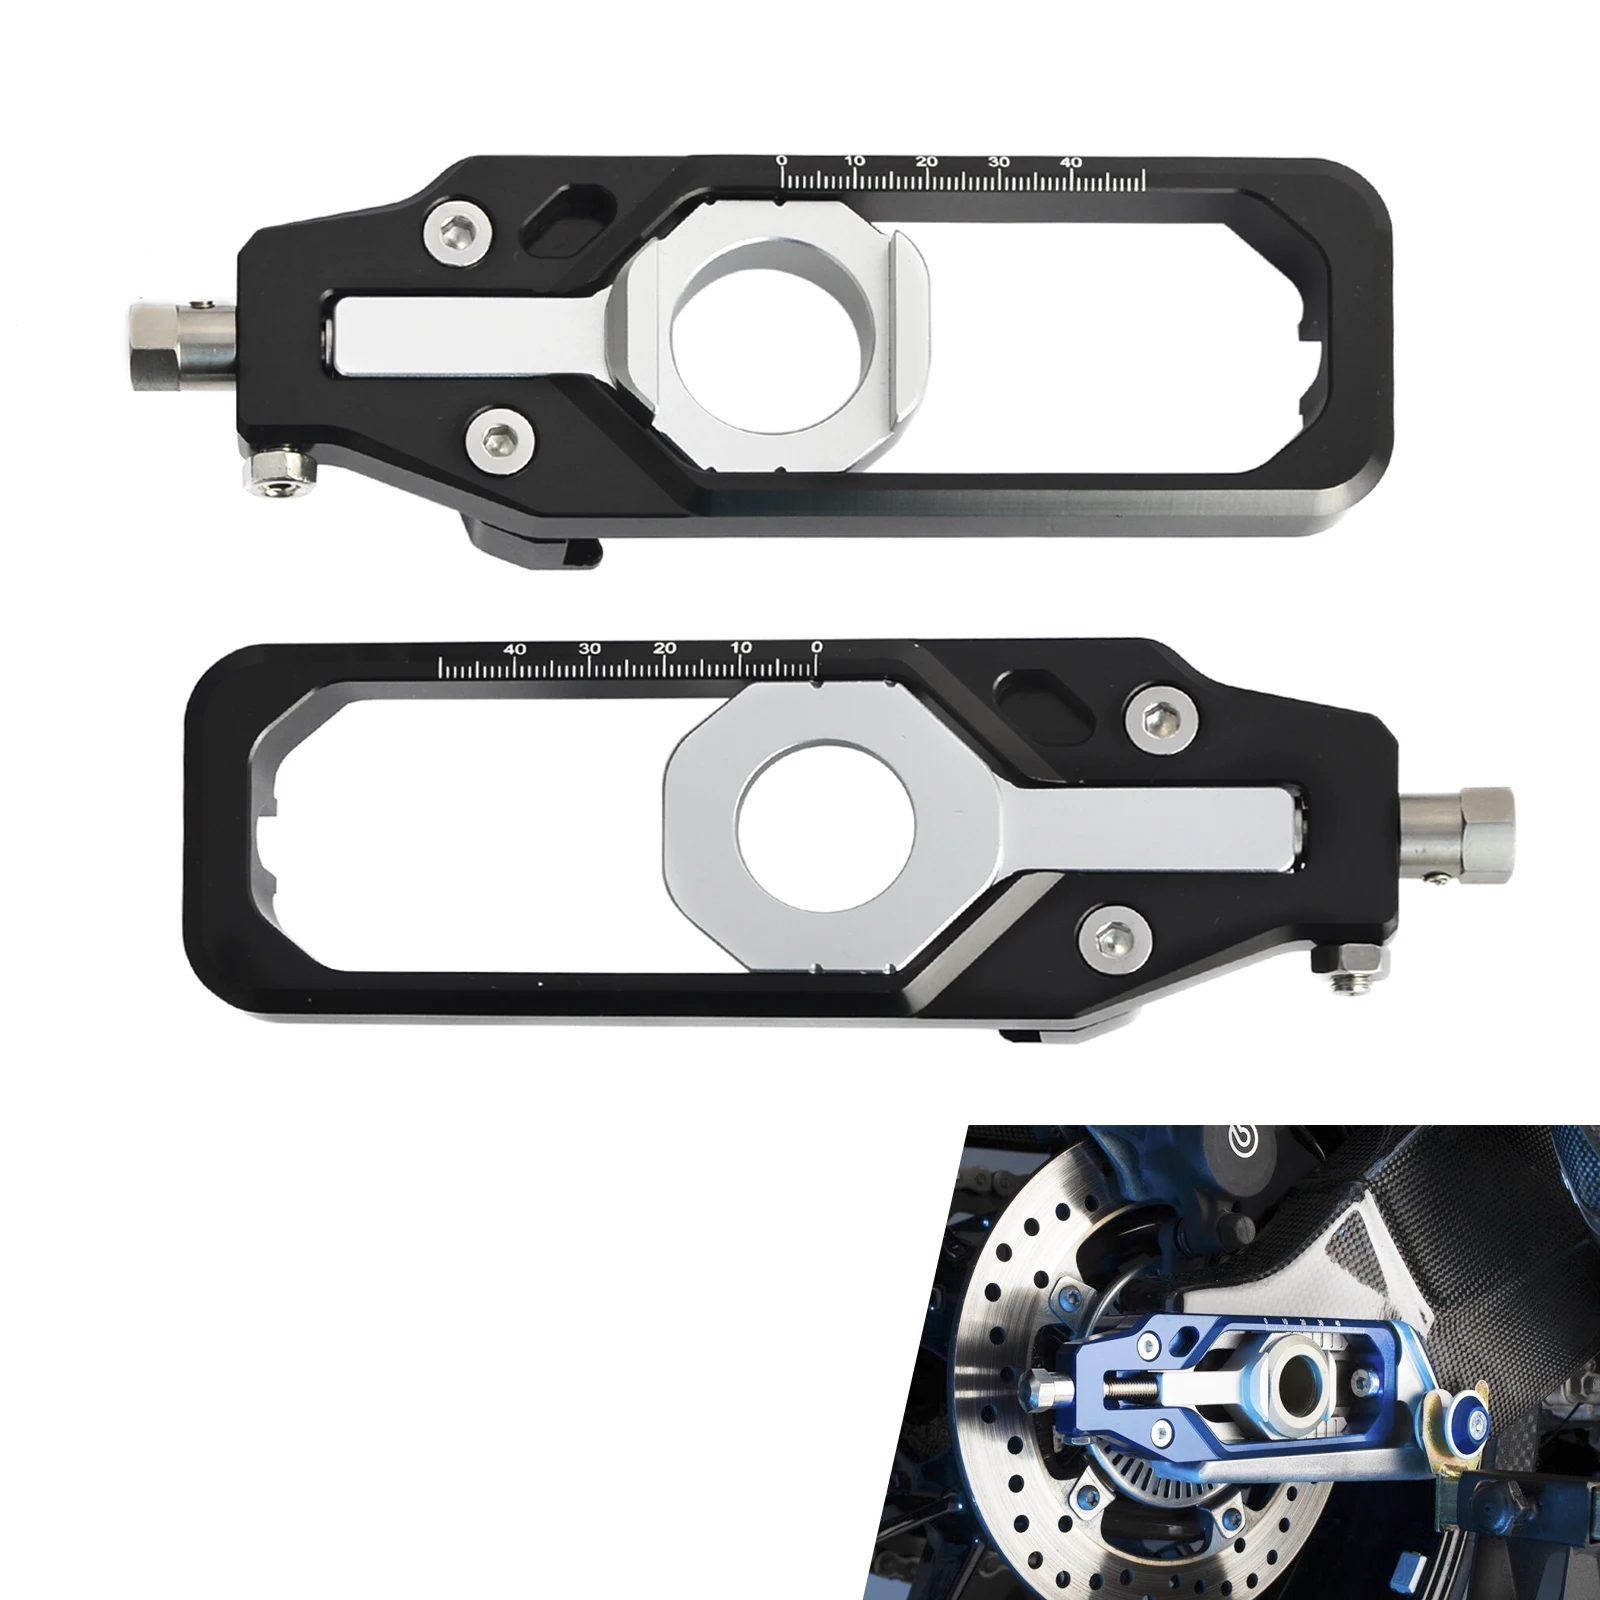 Motorcycle CNC Rear Axle Chain Adjuster Tensioners For S1000RR 2009 2010 2011 2012 2013 2014 2015 2016